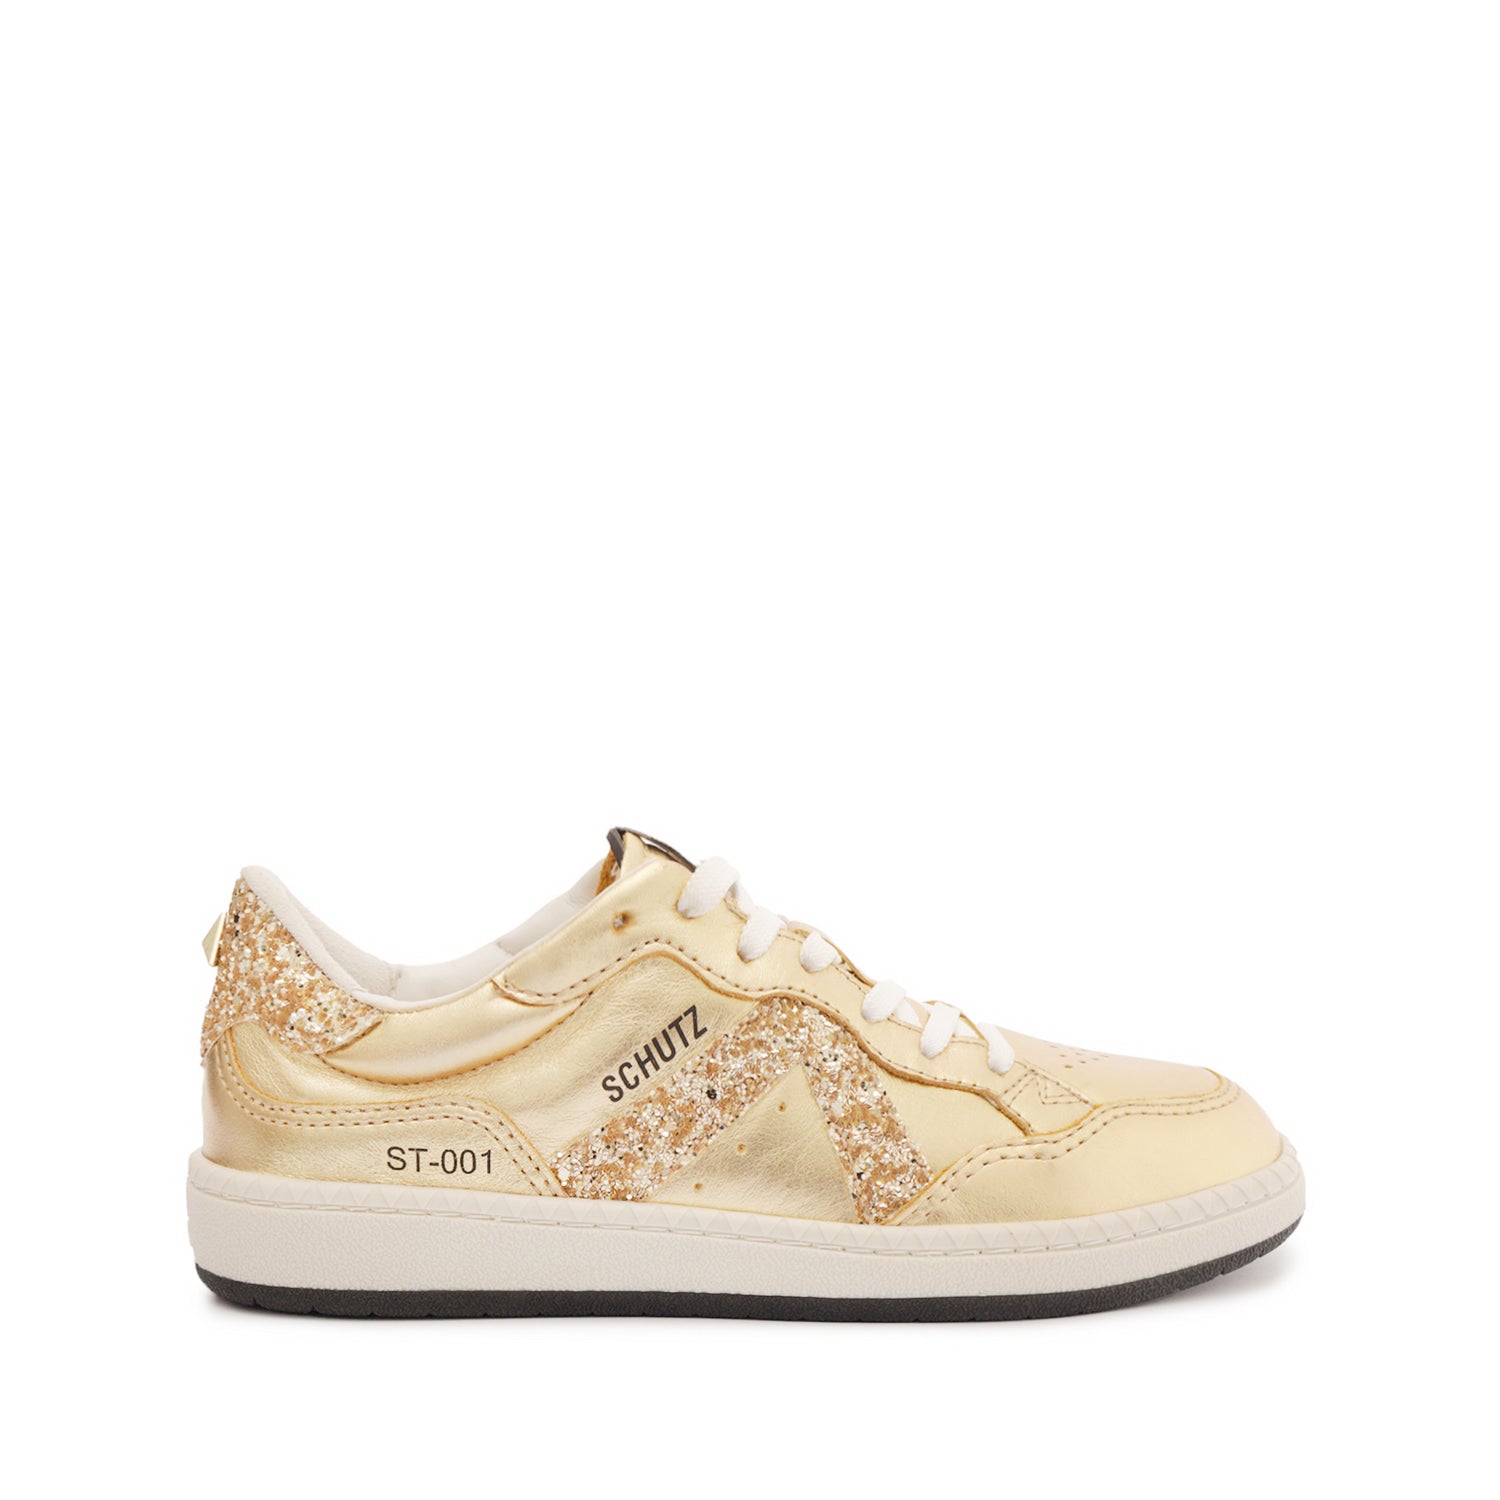 ST-001 Leather Sneaker Sneakers FALL 23 5 Gold Calf Leather - Schutz Shoes